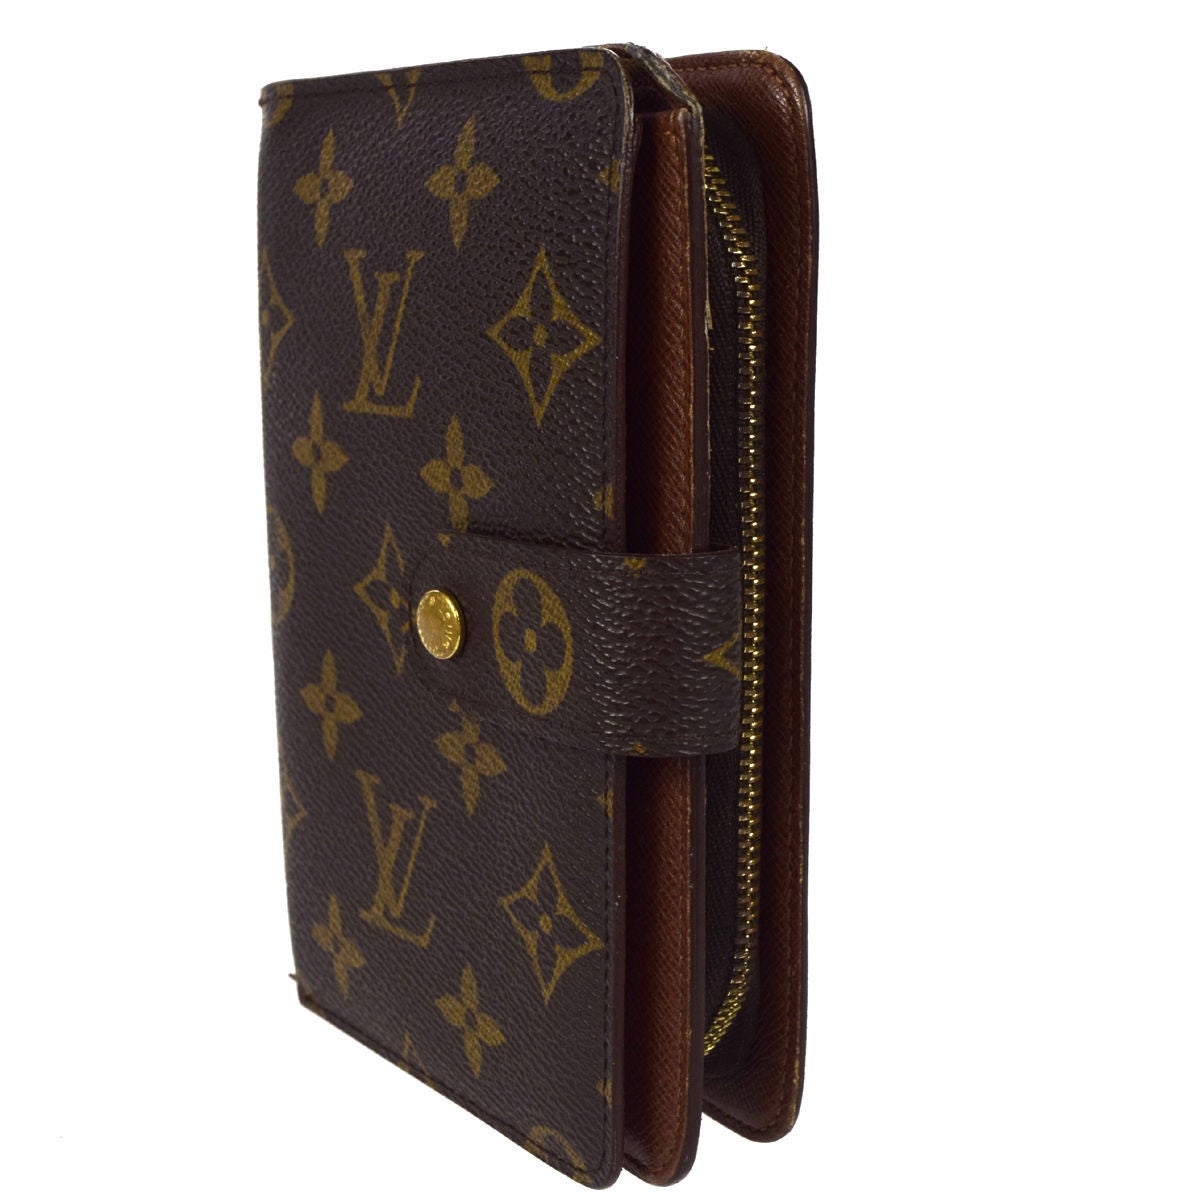 Coveted and discontinued LV porutopapie wallet with ID card sleeve.

Contains: 8 card holders, 1 bill slot, zip coin with two pockets. 

Snap closes, but feels a touch loose.

Measurements: 6